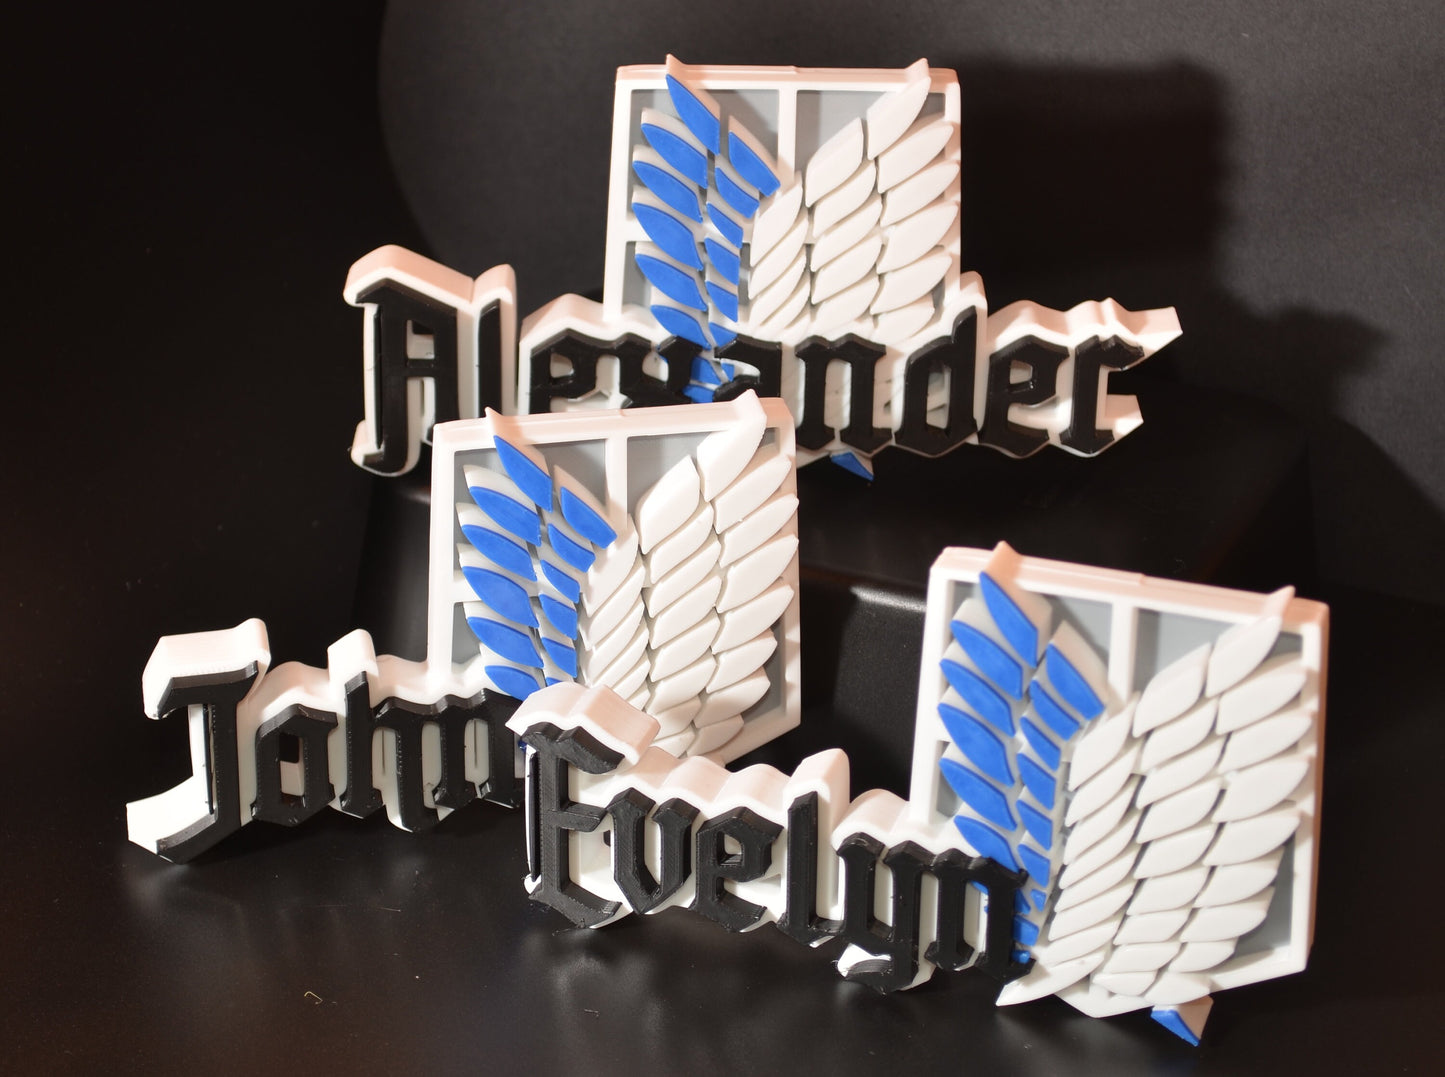 Attack on Titan-Inspired Personalized Custom 3D-Printed Name Sign